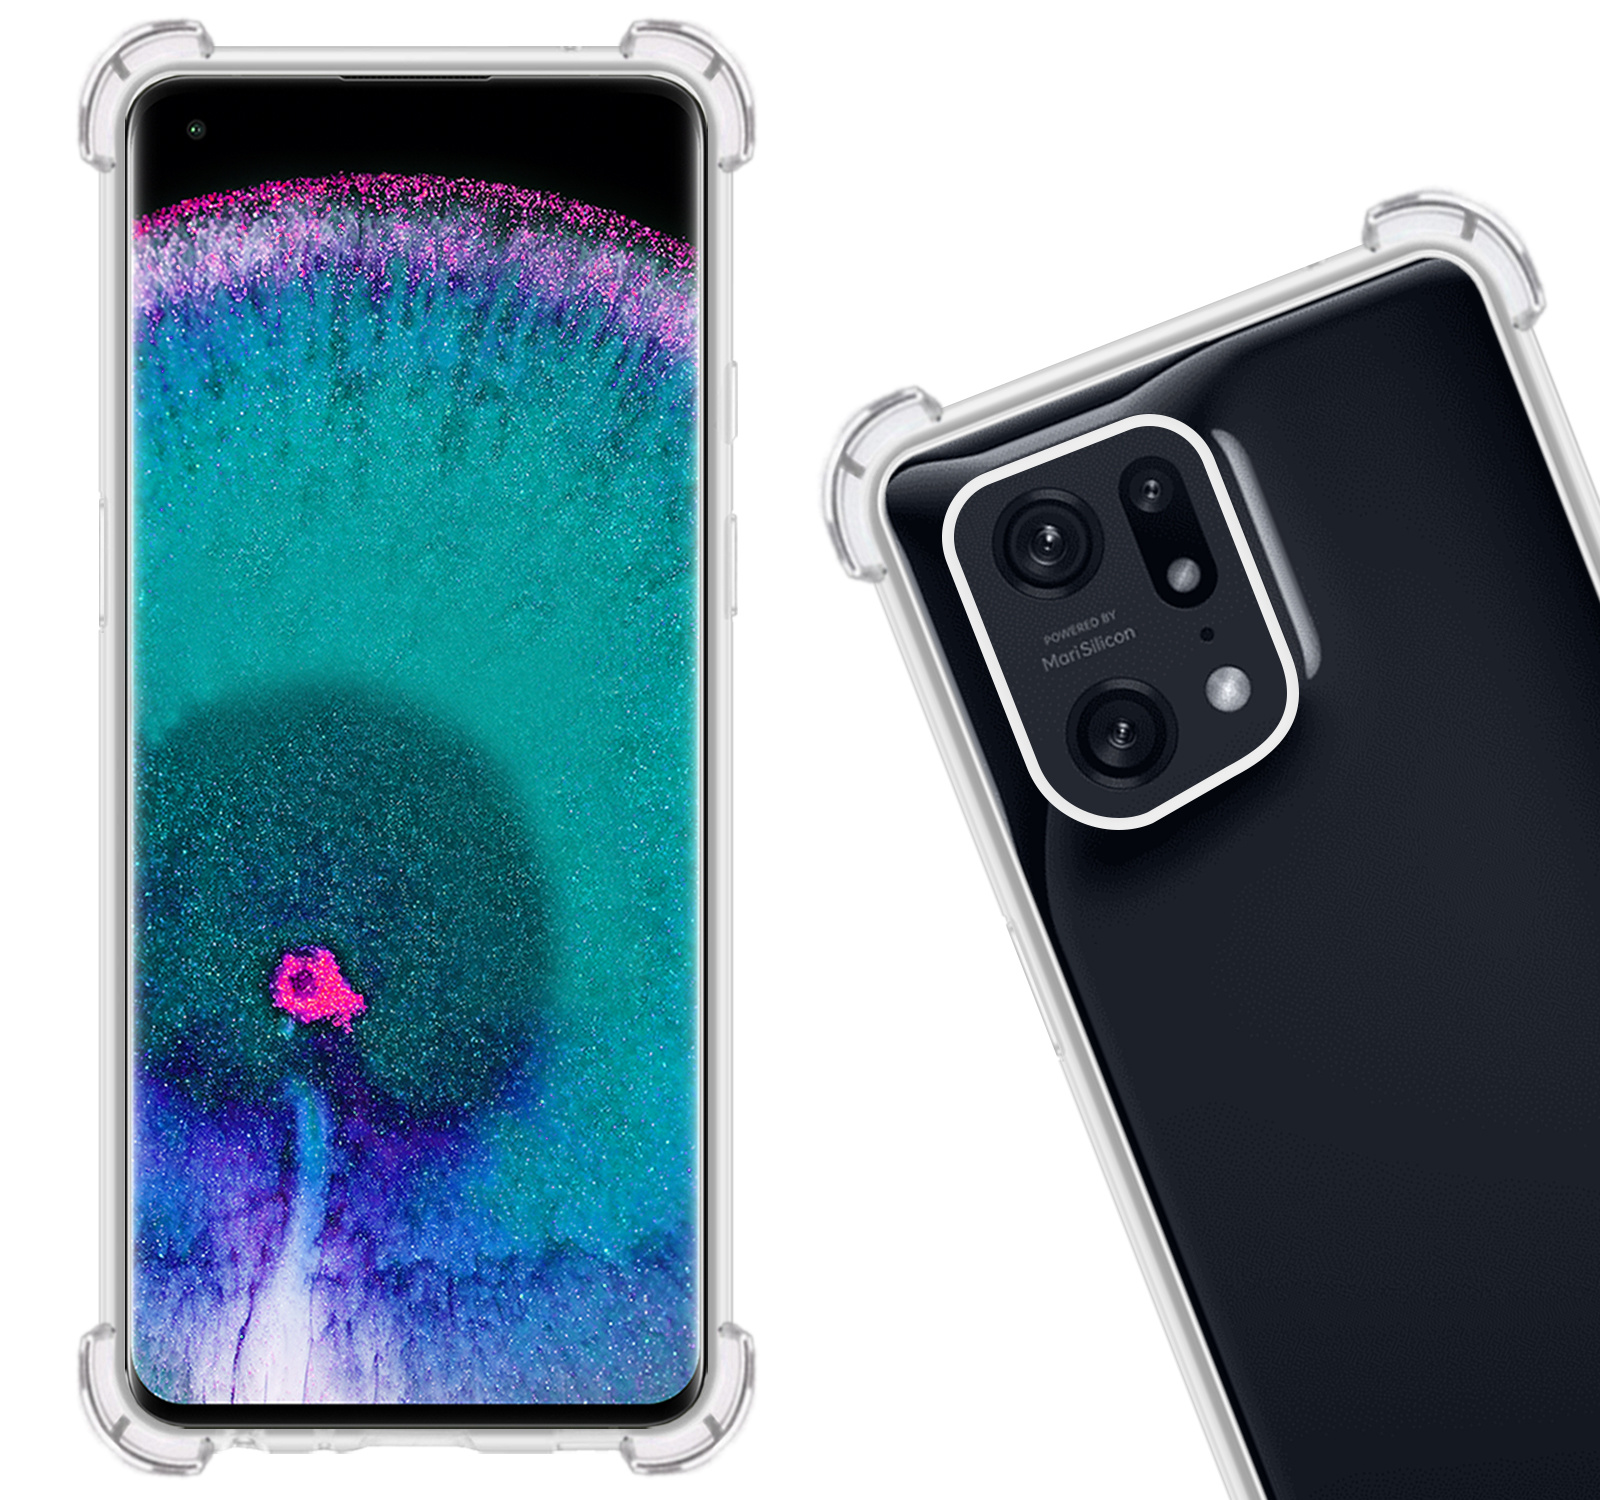 Nomfy OPPO Find X5 Pro Hoesje Shock Proof Cover Case Shockproof - OPPO Find X5 Pro Hoes Shock Proof Back Case - 2X - Transparant